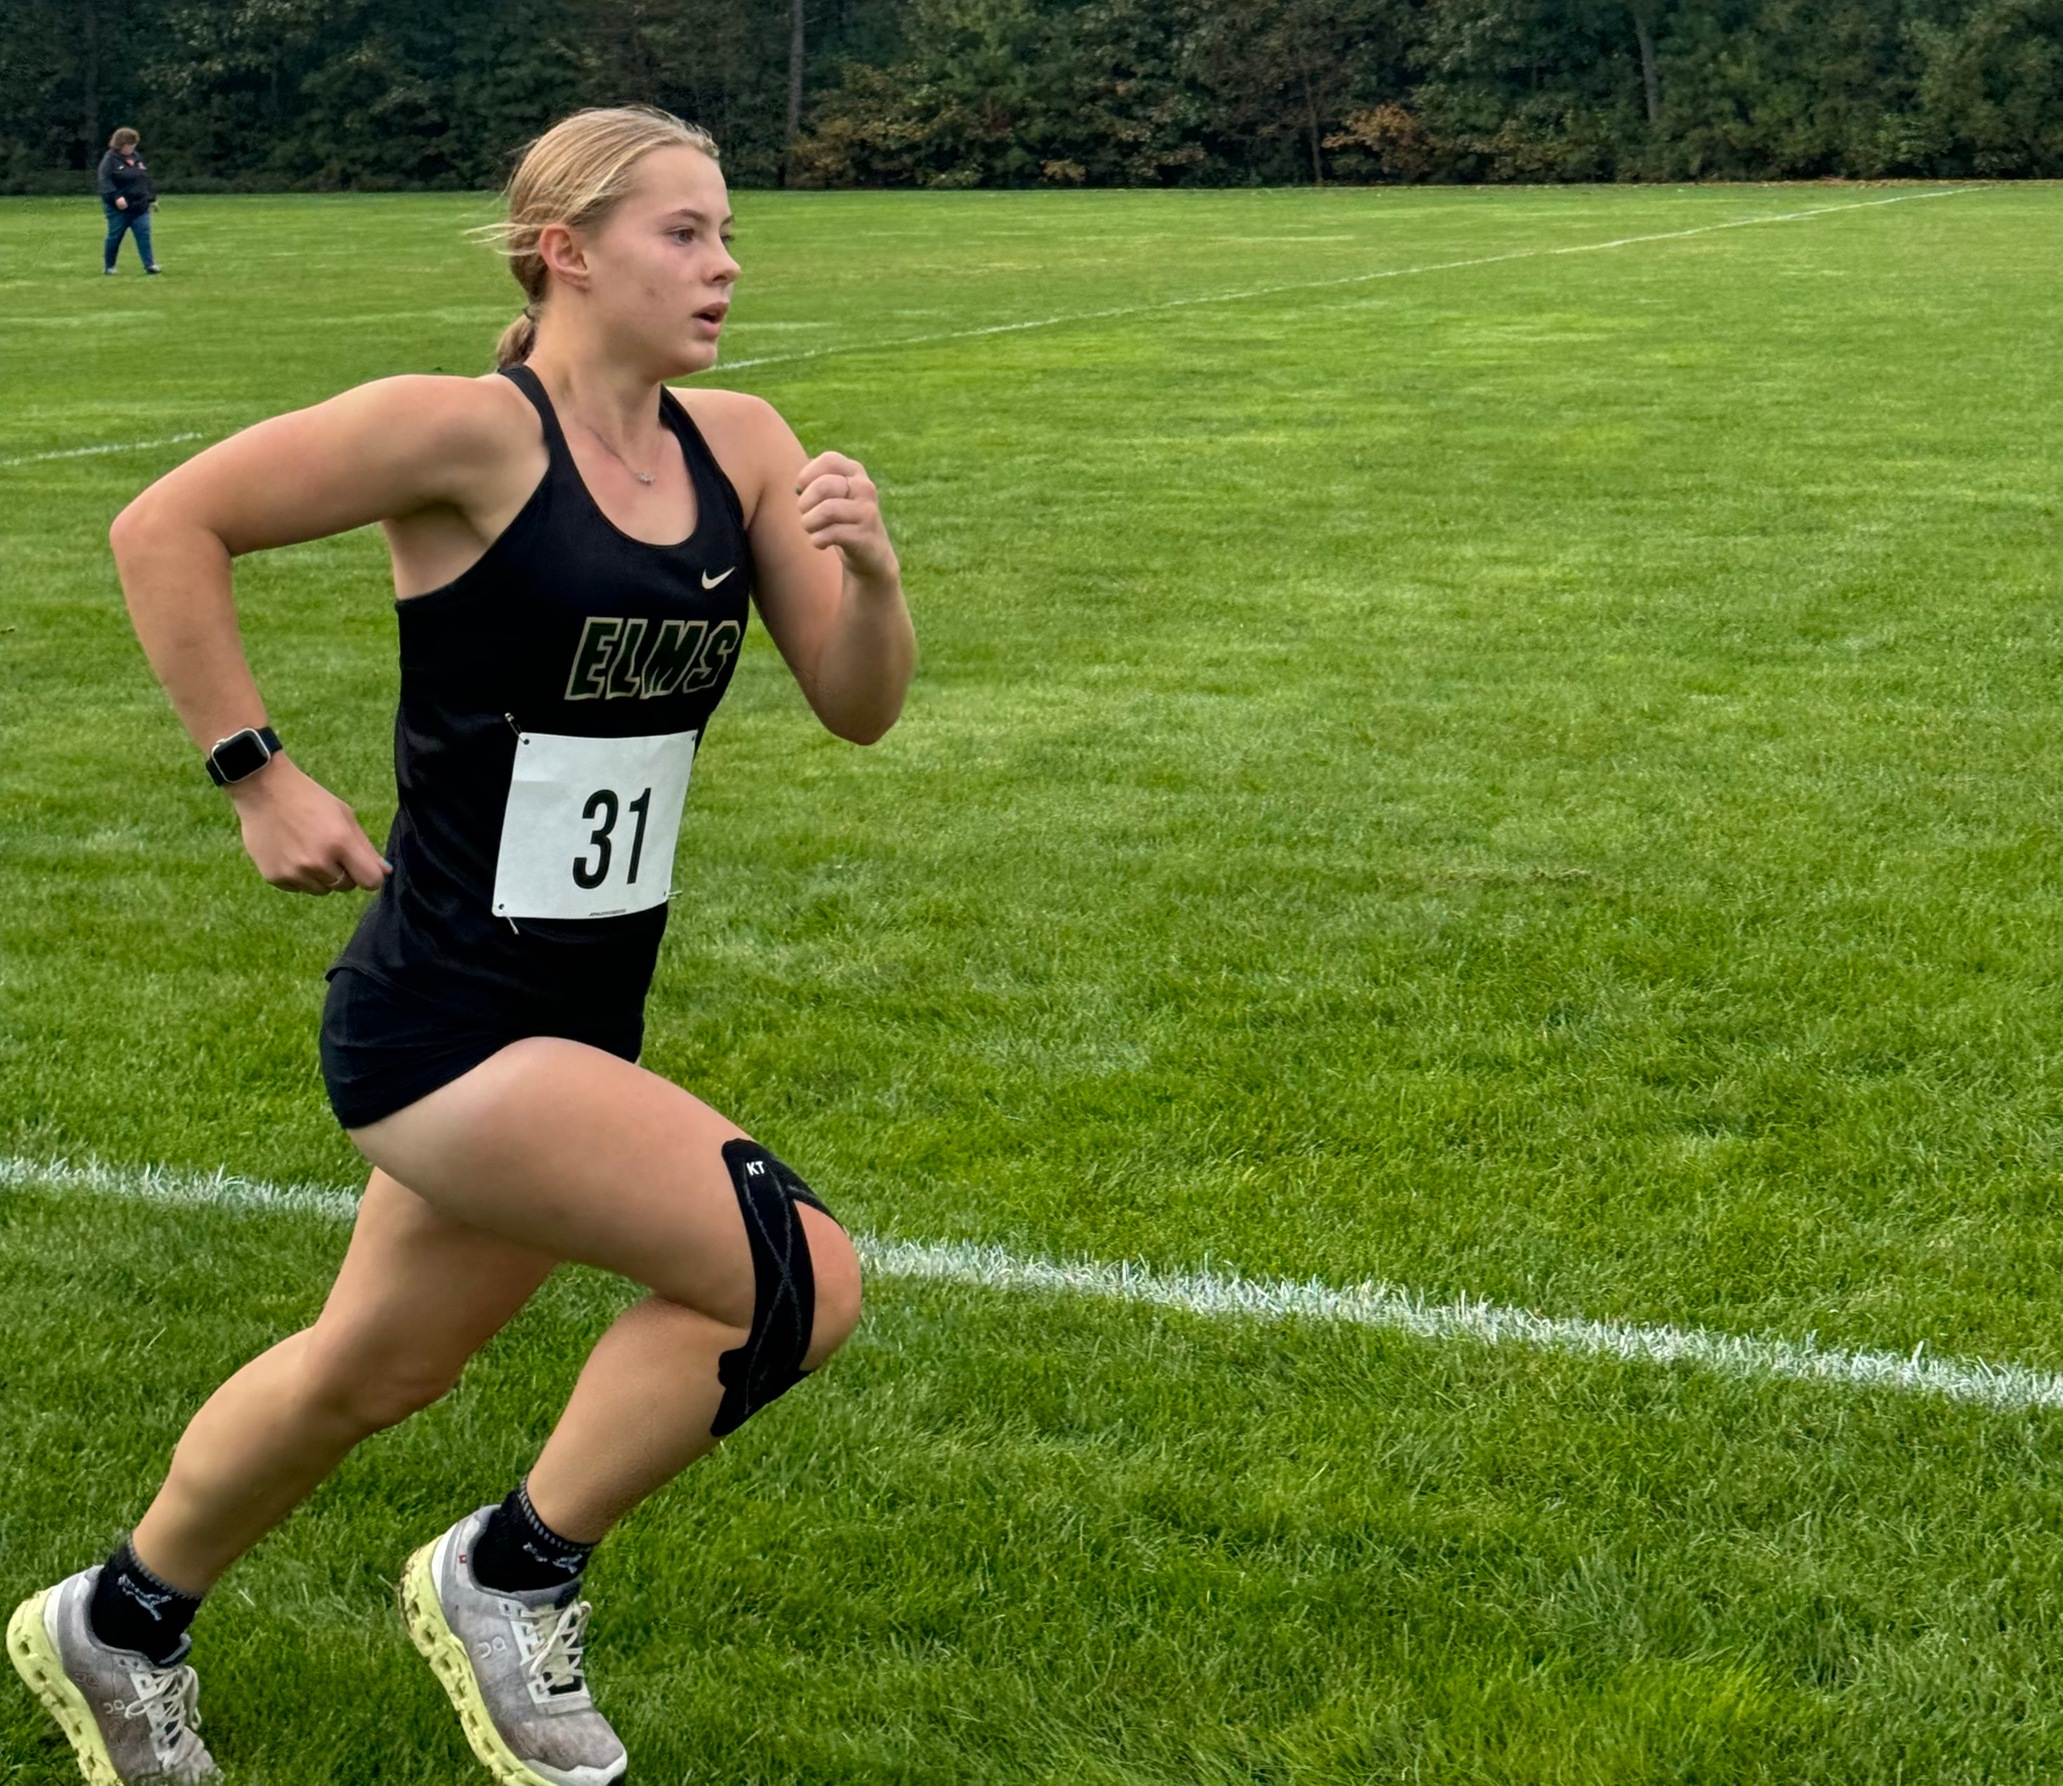 Blazers Competed in the Golden Bears Invitational